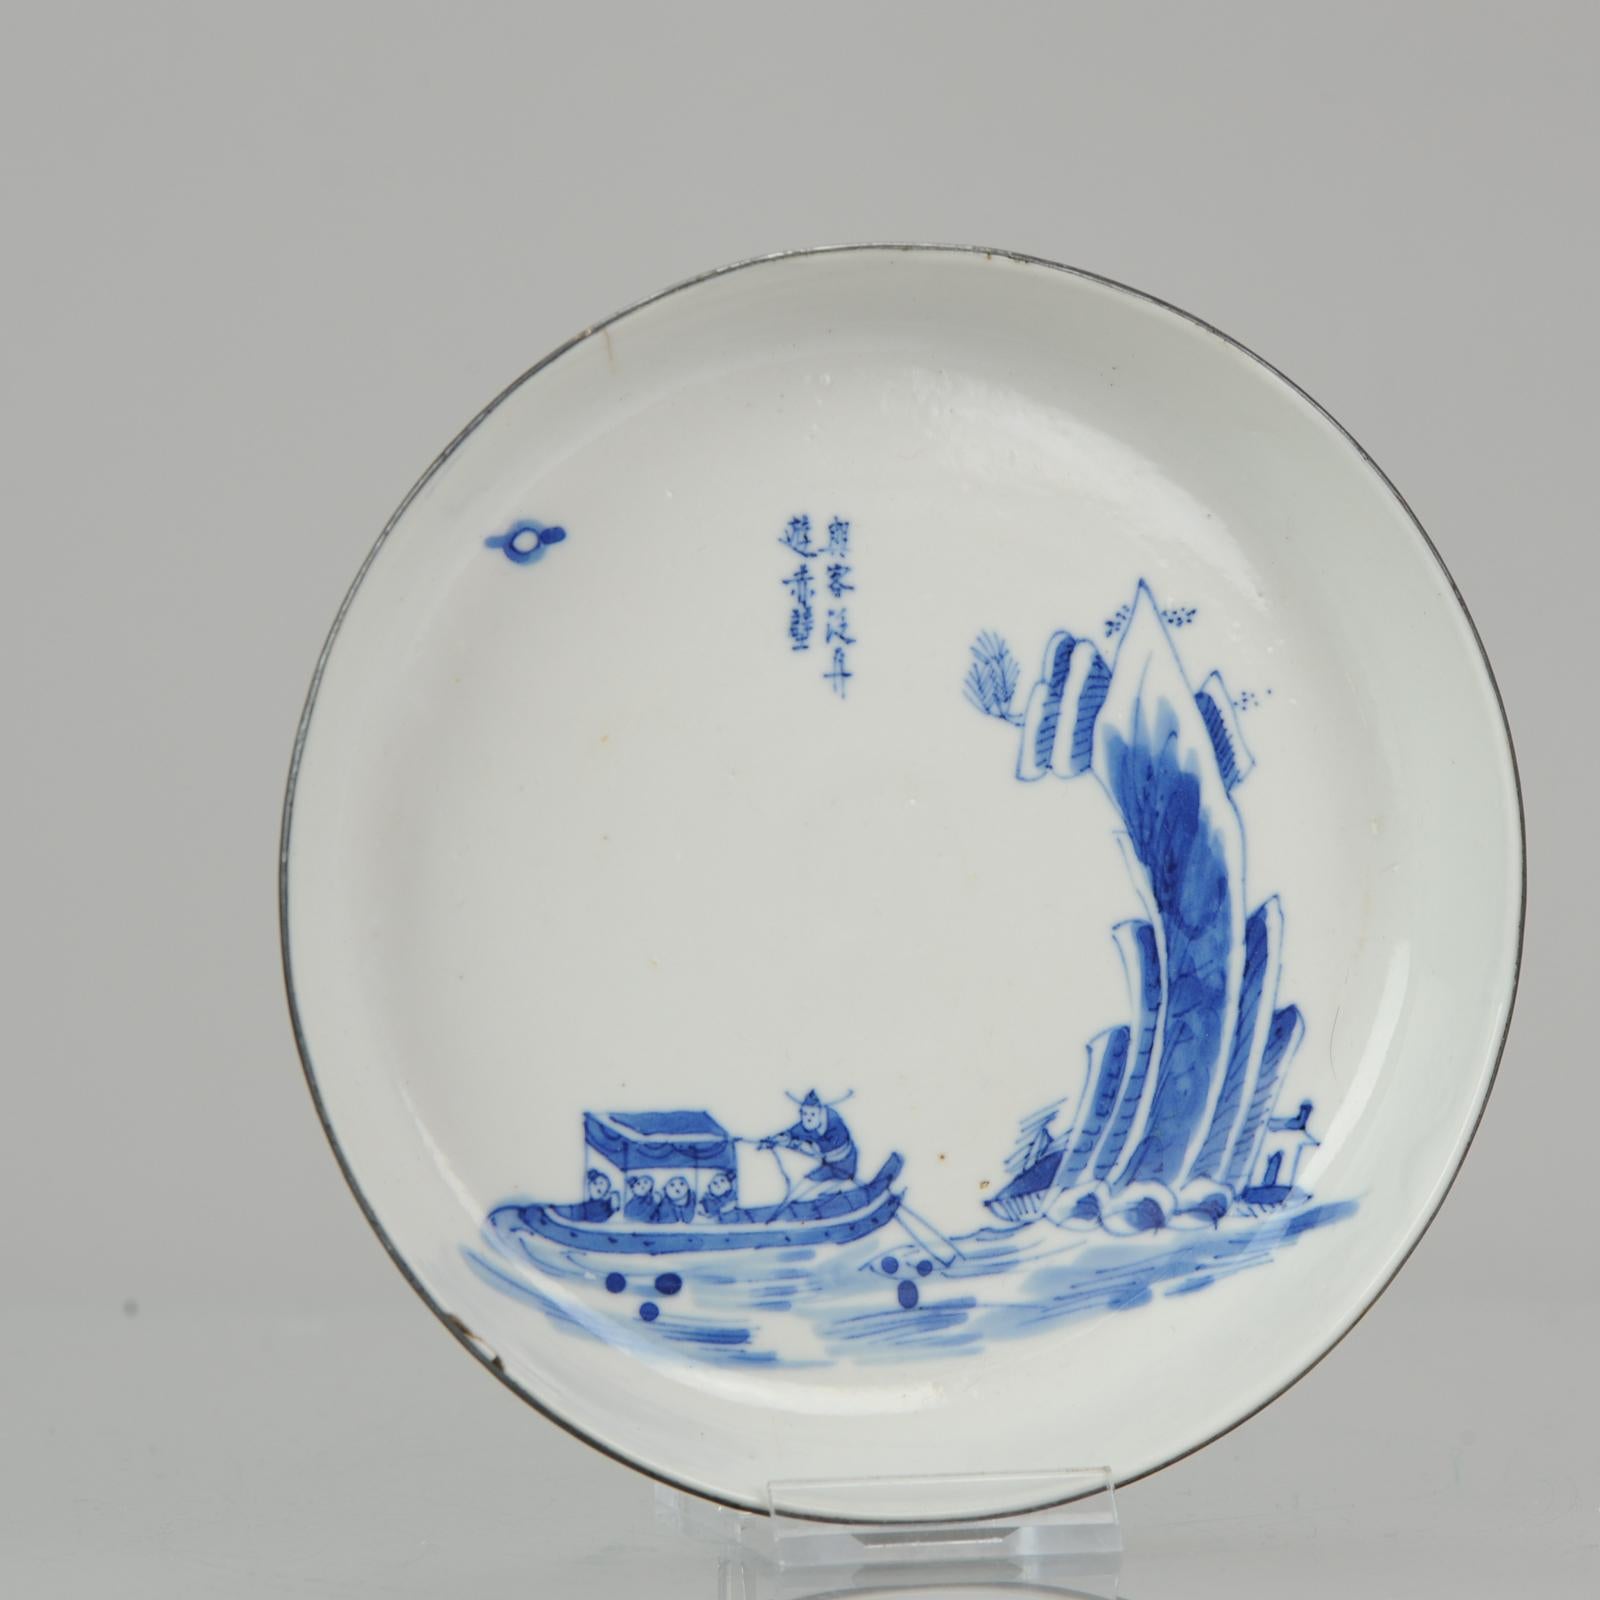 A top quality dish of Bleu de Hue porcelain. The interior painted with a scene from 'Ode to the Red Cliff' through a mountainous riverscape. China, 19th century. For the Vietnamese market

Marked Nei Fu, or Inner Court.

Bleu de Hue
Chinese